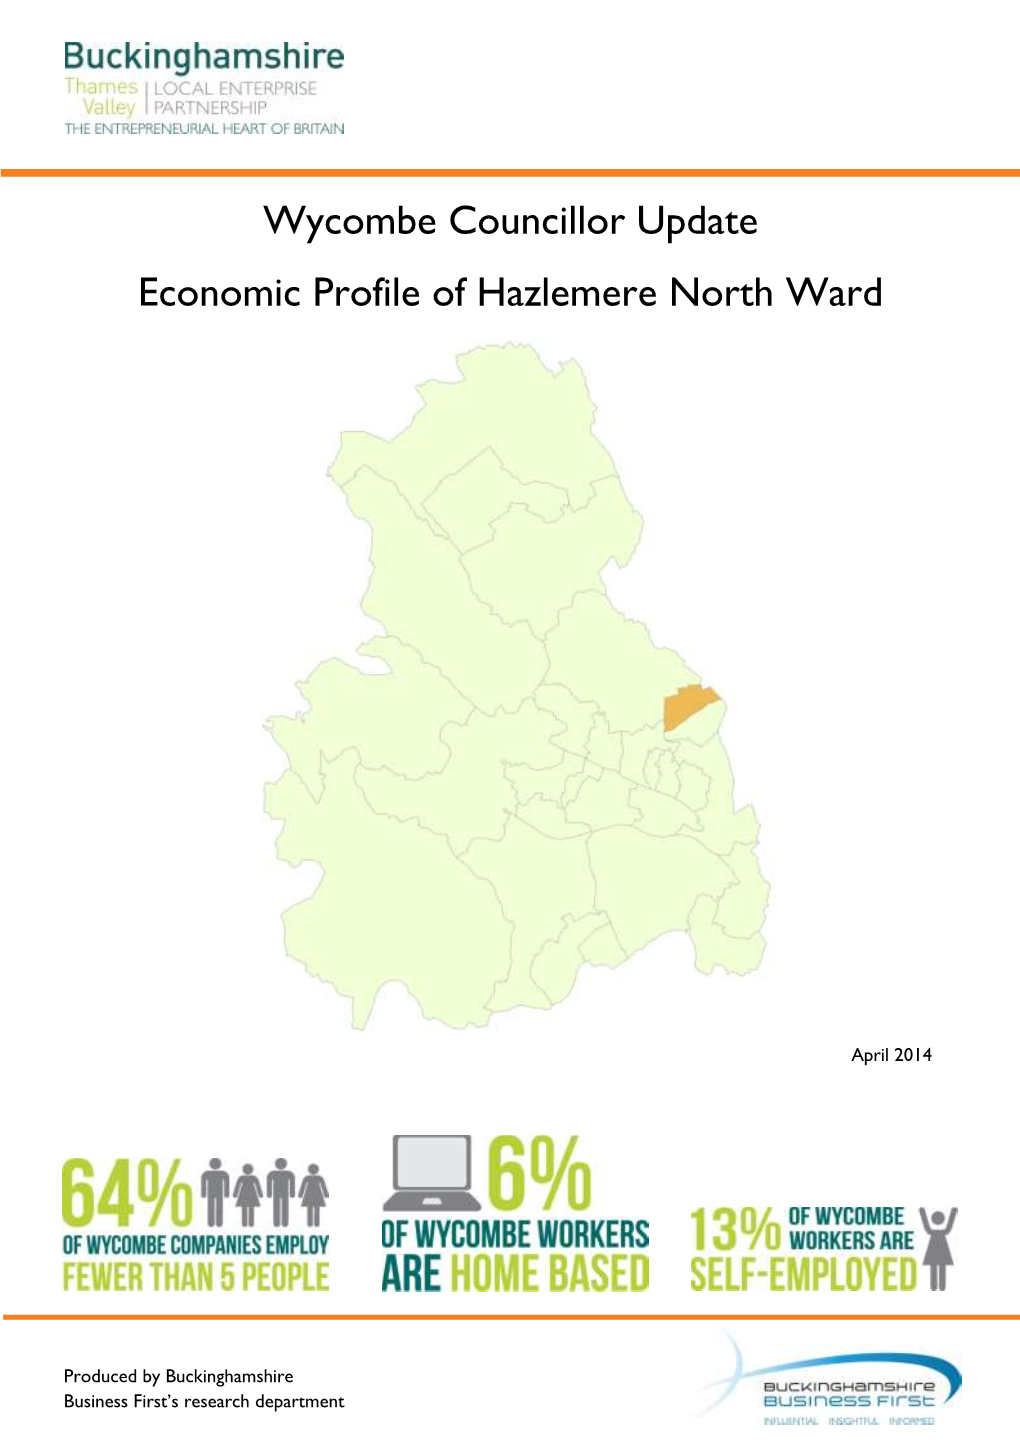 Wycombe Councillor Update Economic Profile of Hazlemere North Ward